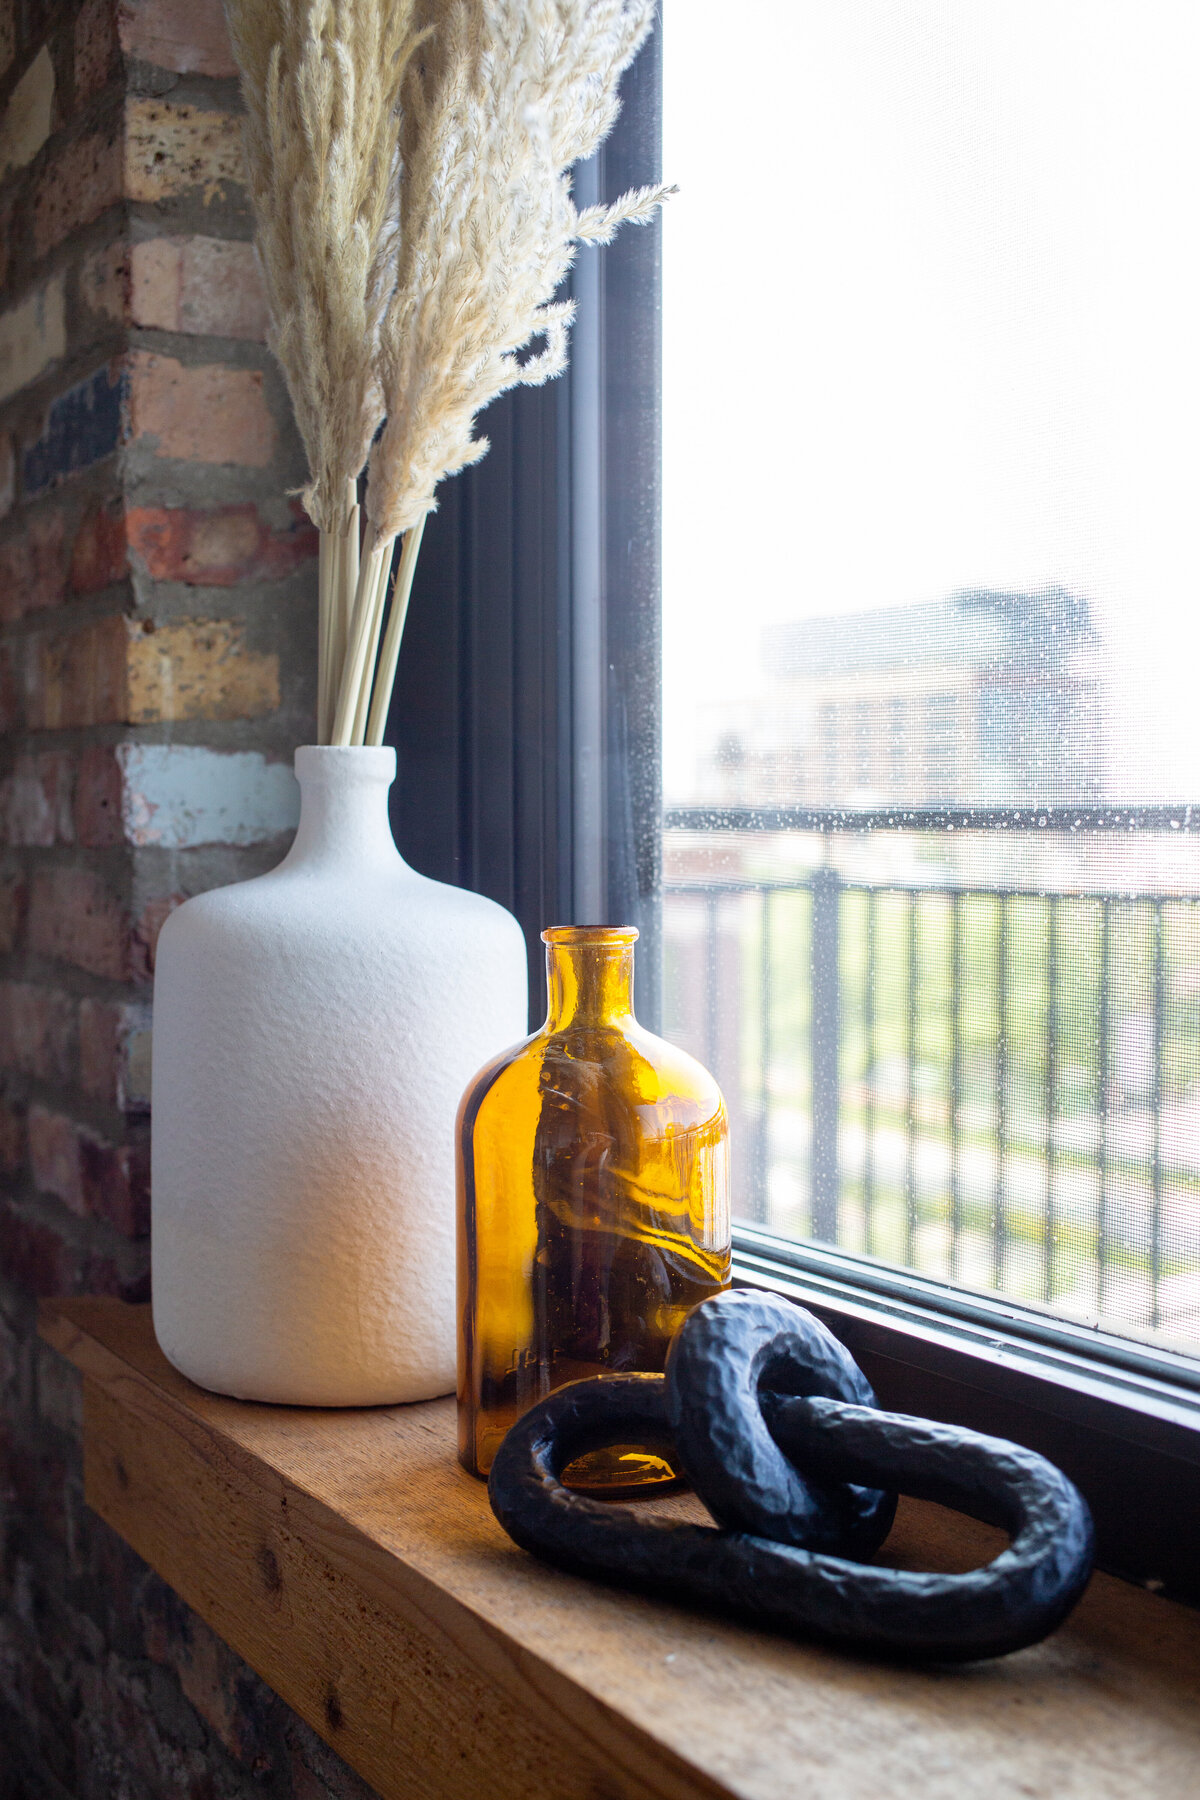 Brick wall with wooden window sill with white ceramic vase filled with pampas grass, amber glass vase and black chain object